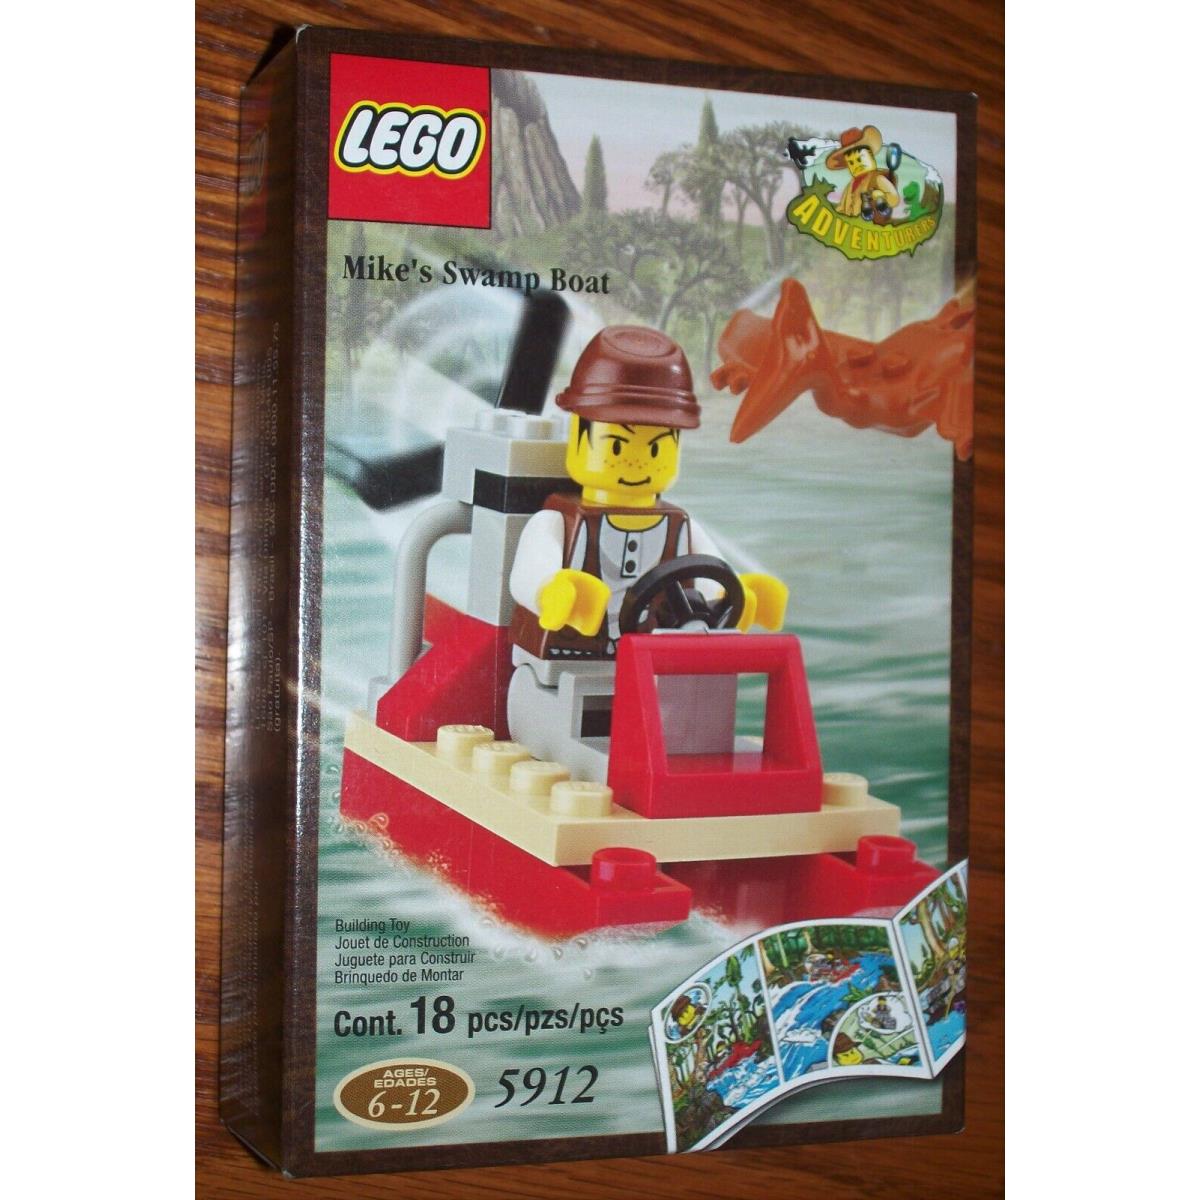 Lego - Adventures Mike`s Swamp Boat 5912 2000 - Nice